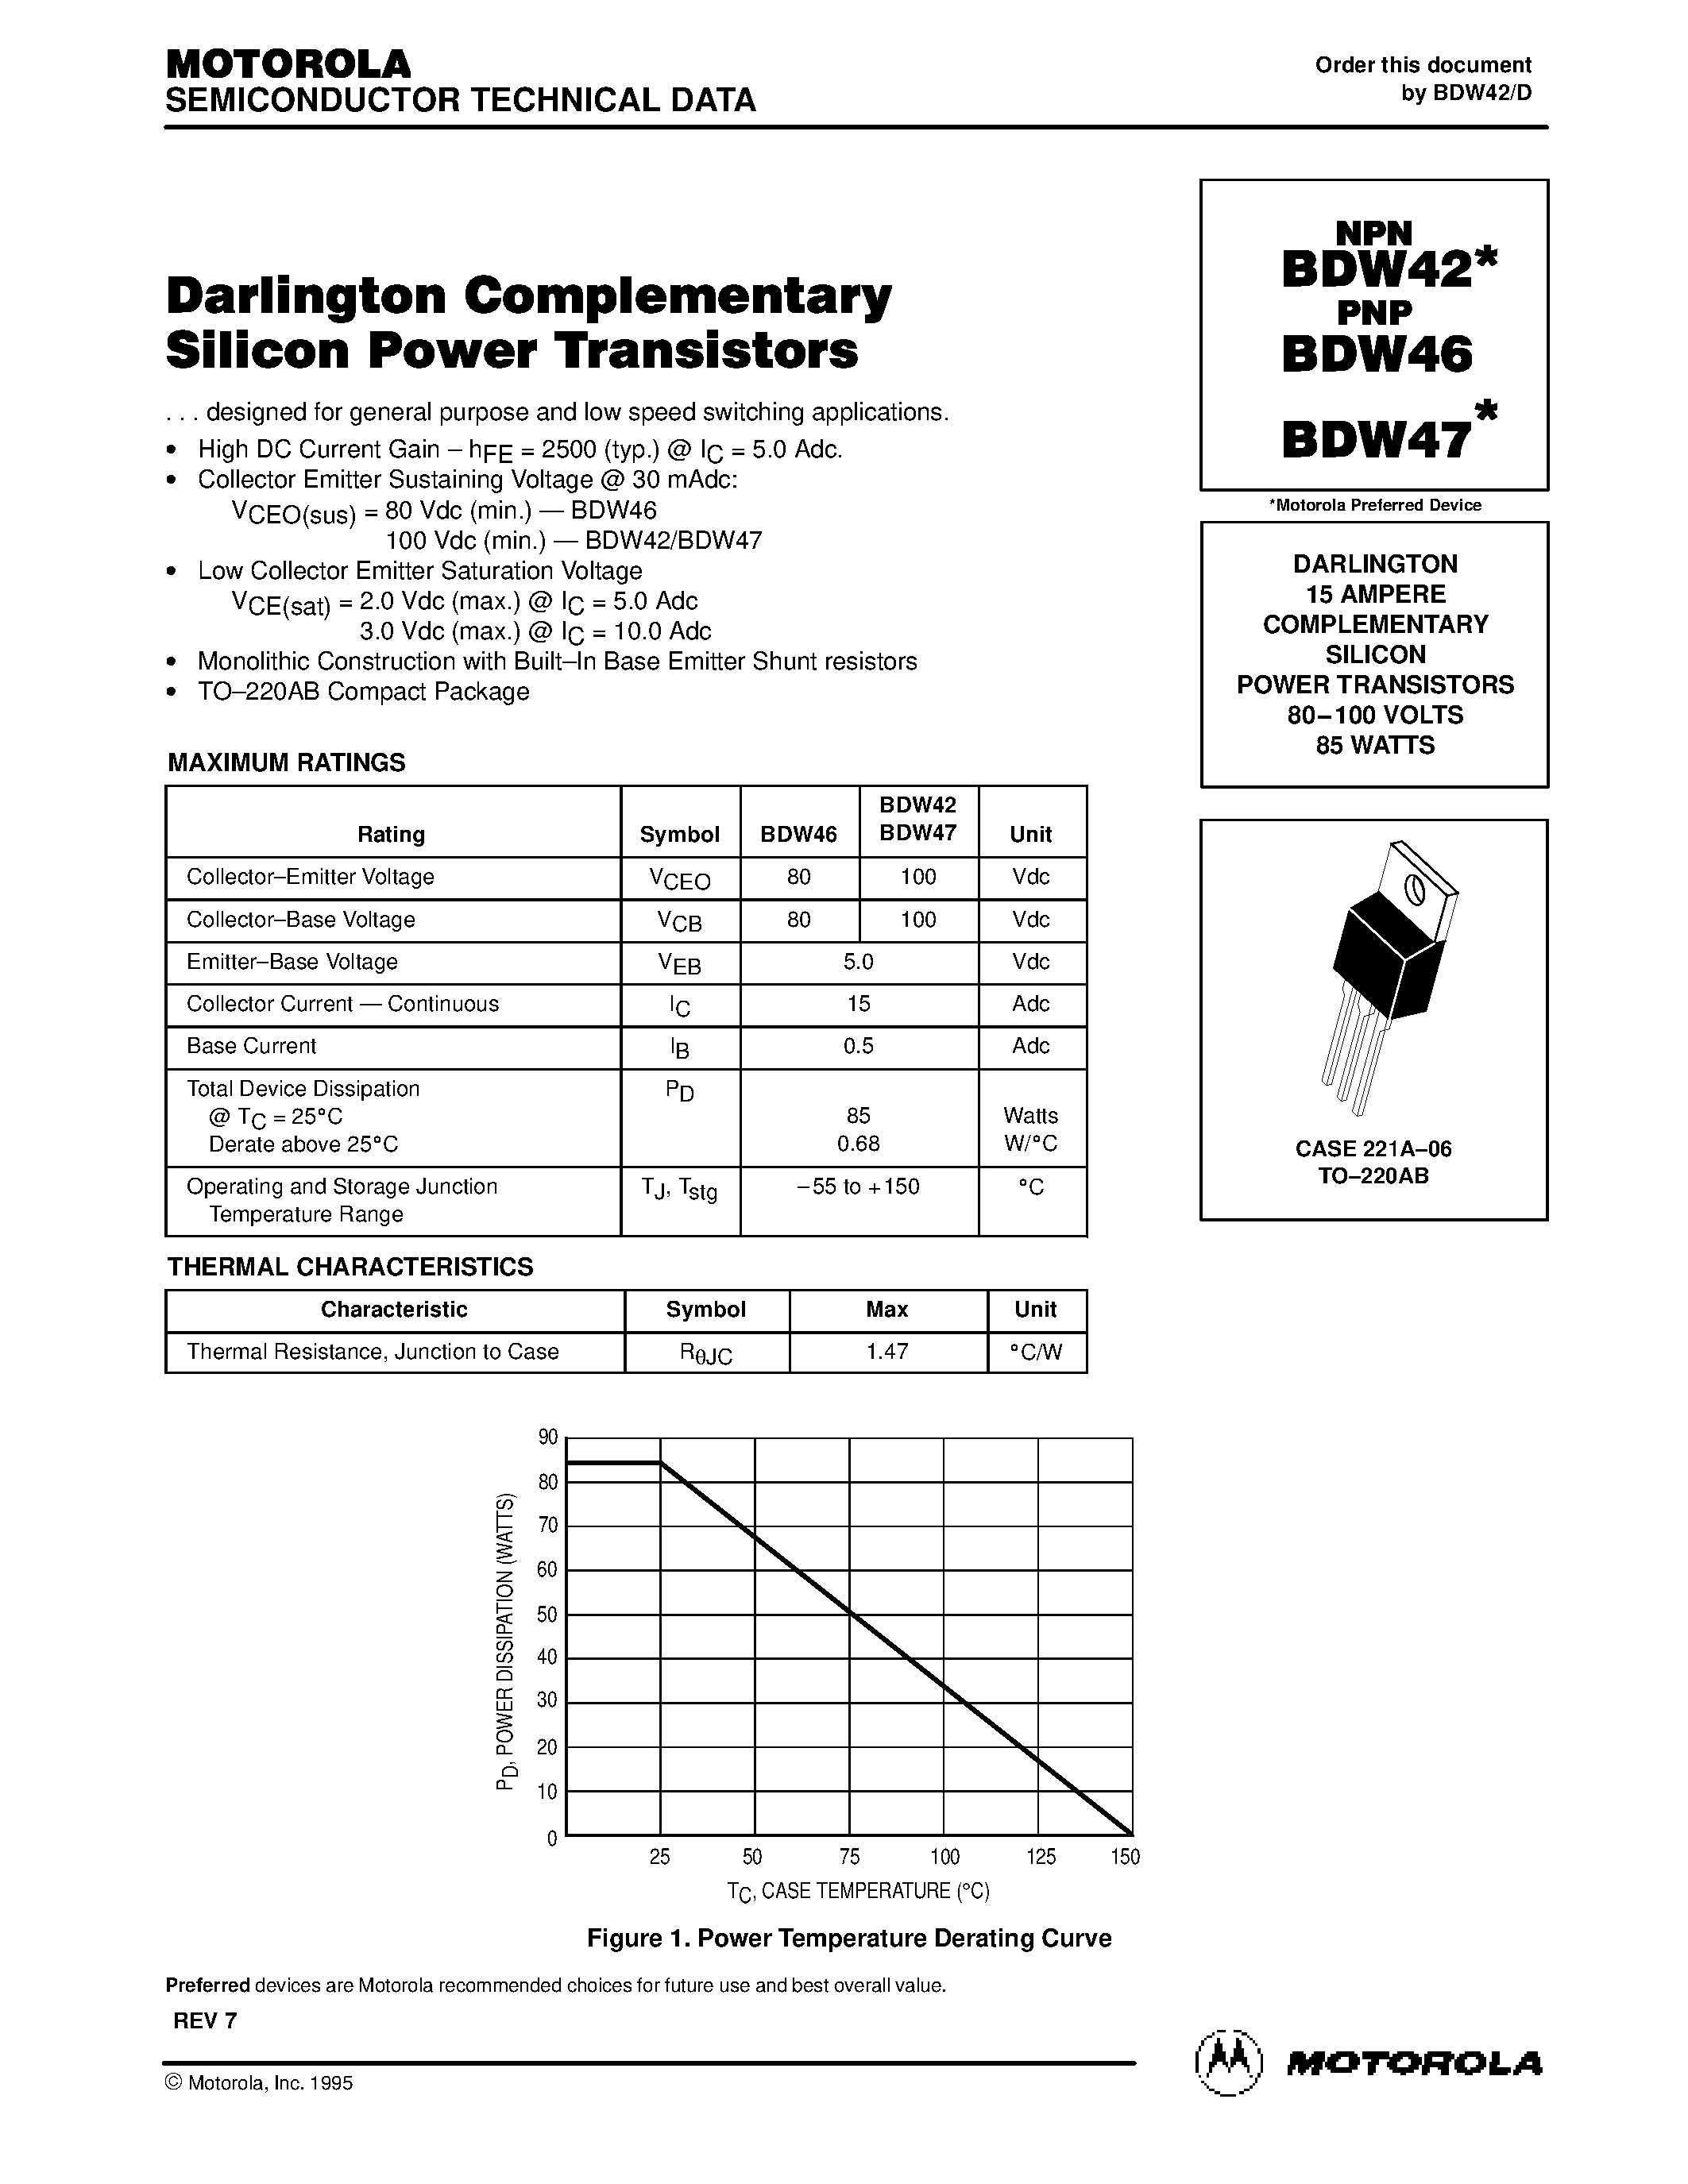 Даташит BDW42 - Darlington Complementary Silicon Power Transistors страница 1